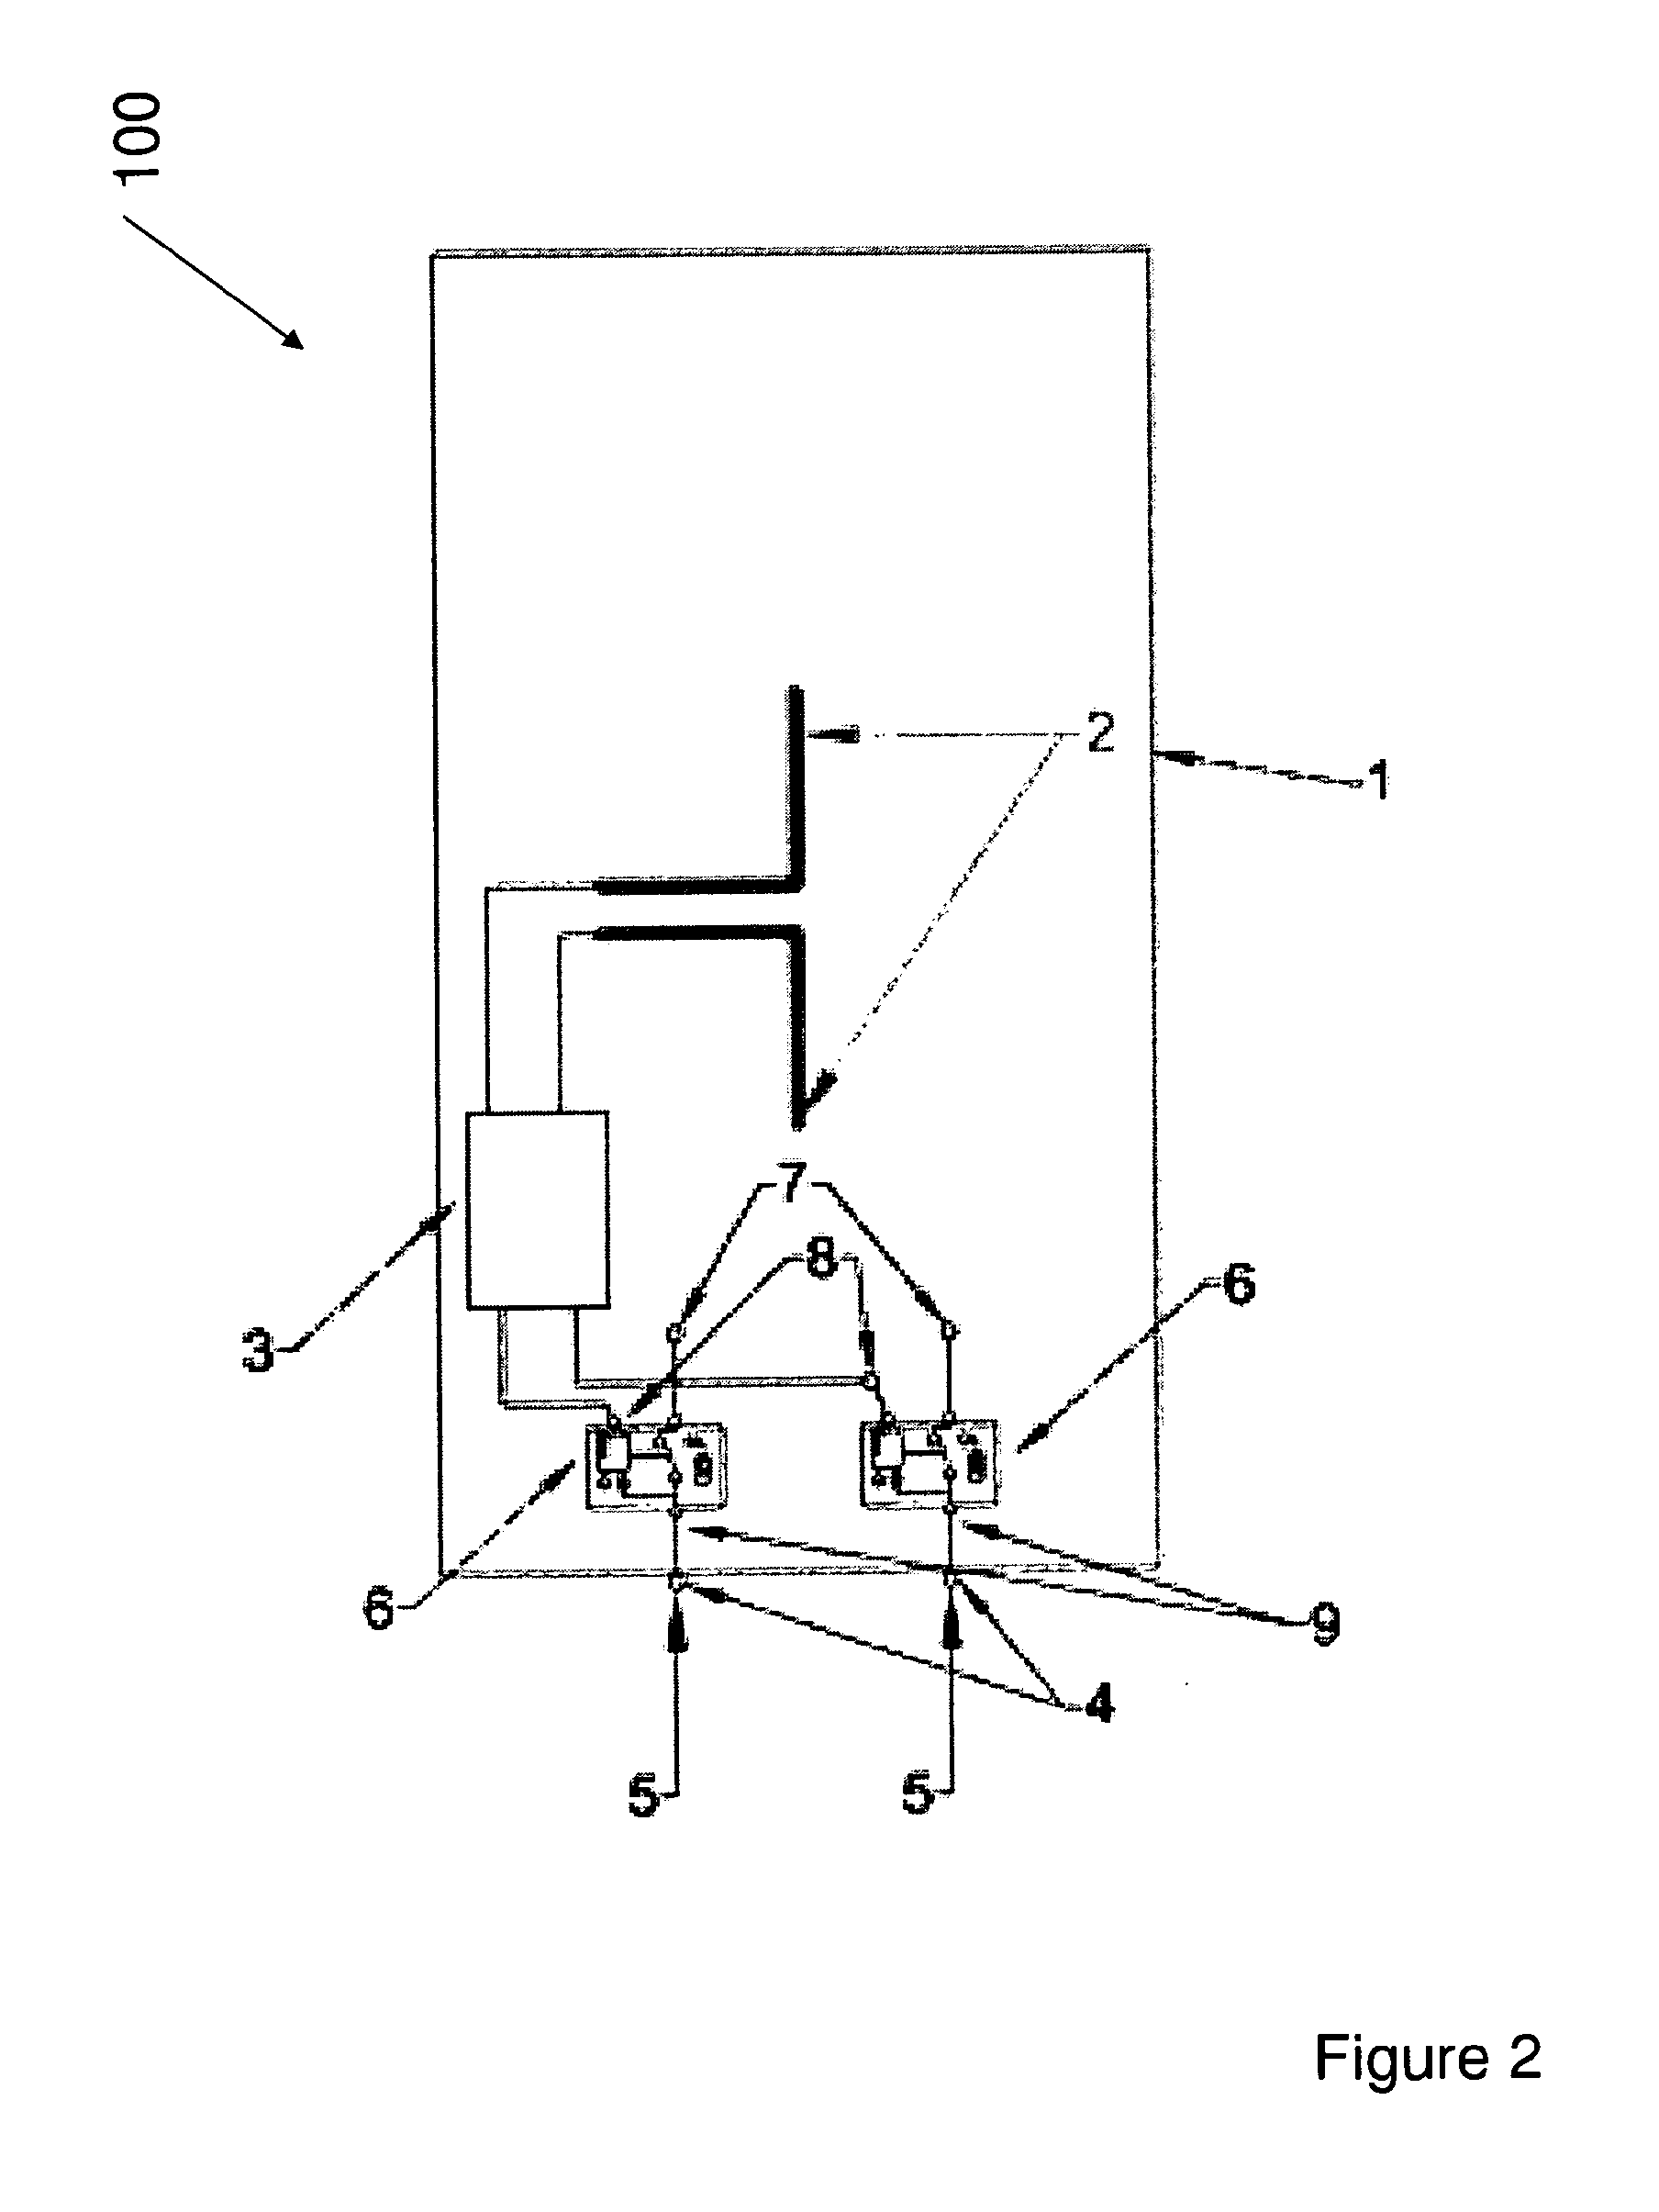 Antenna system to control RF radiation exposure